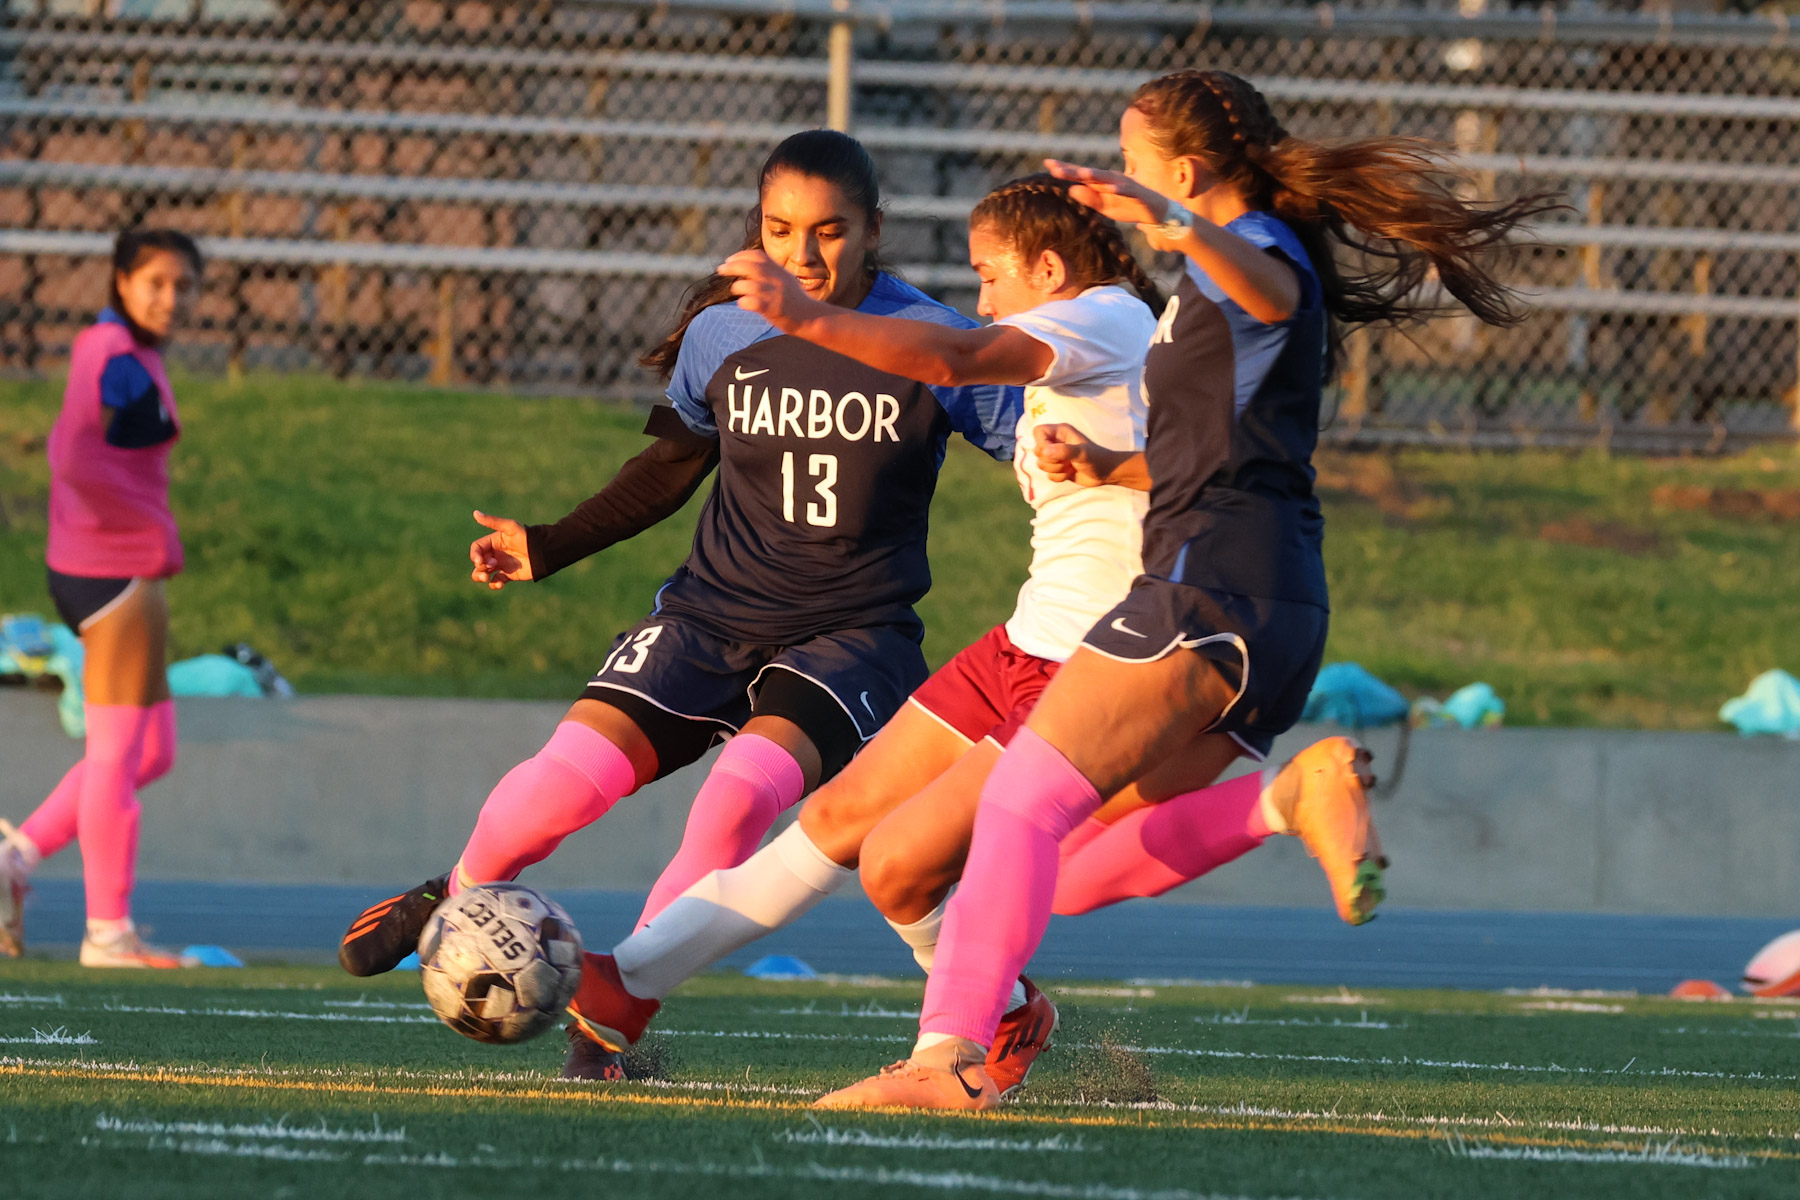 Alexa Espinoza-Gutierrez drives in the Lancers first goal in their SCC-opening win at LA Harbor (photo by Richard Quinton).